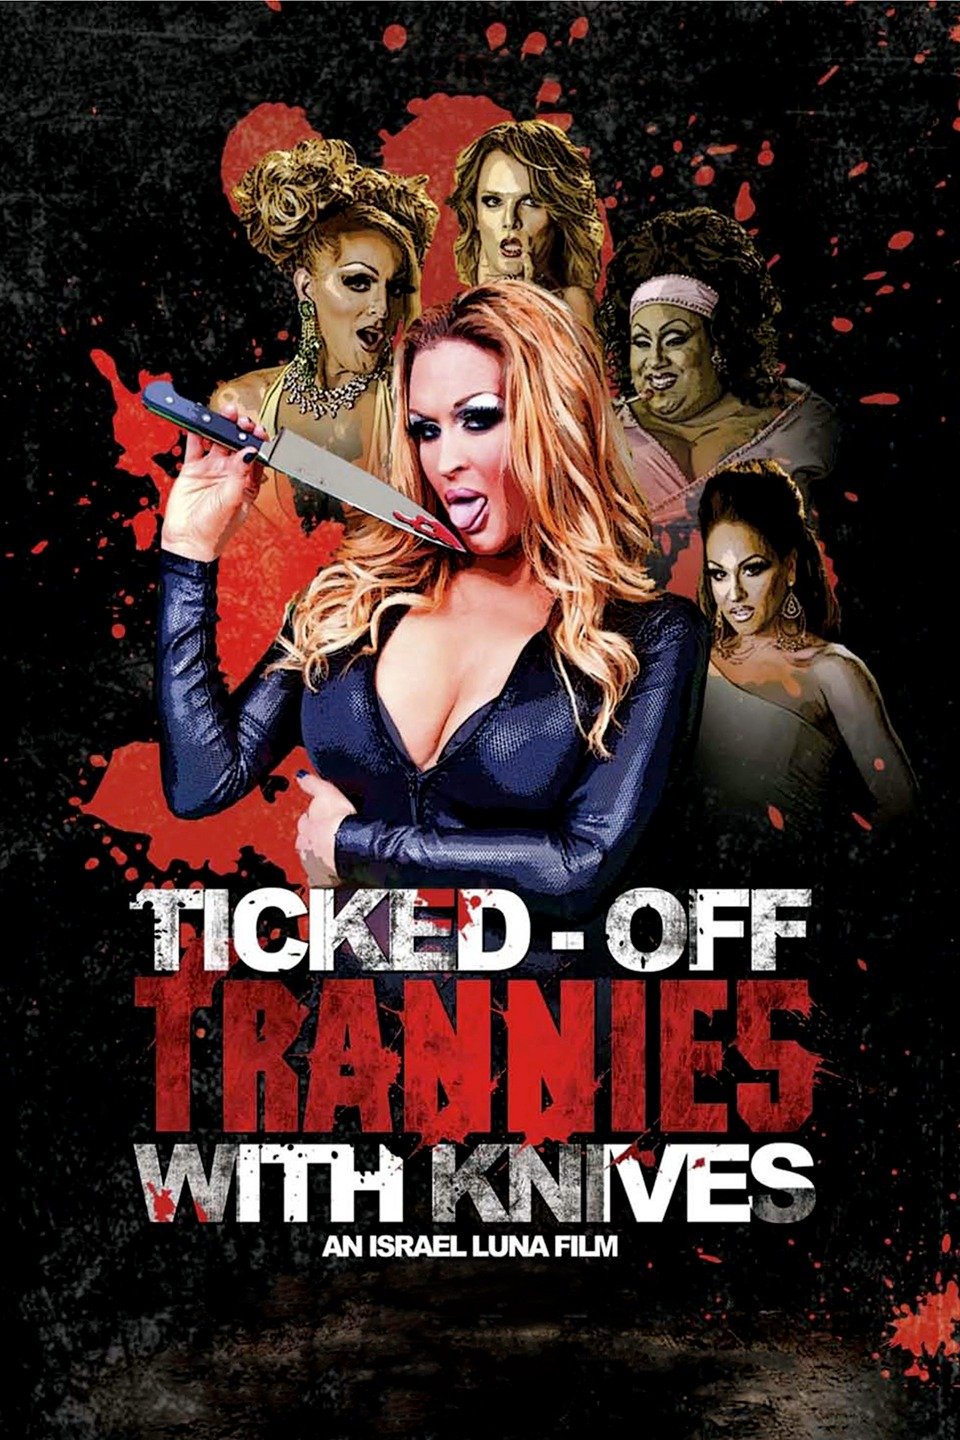 Ticked off transvestites with knives cast